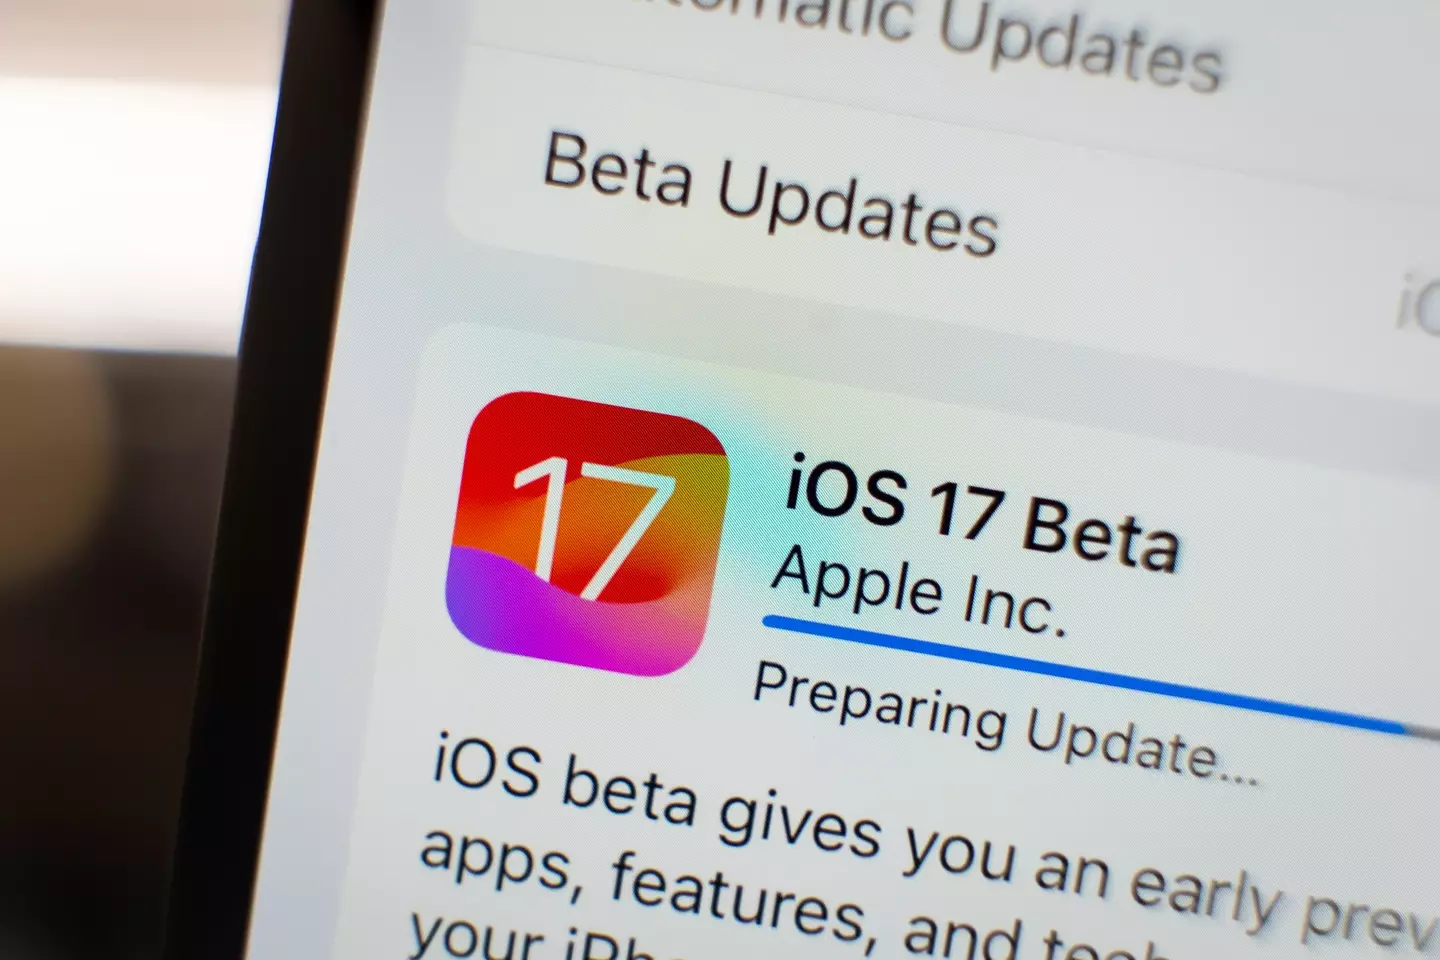 iOS 17 will release to the public in September.